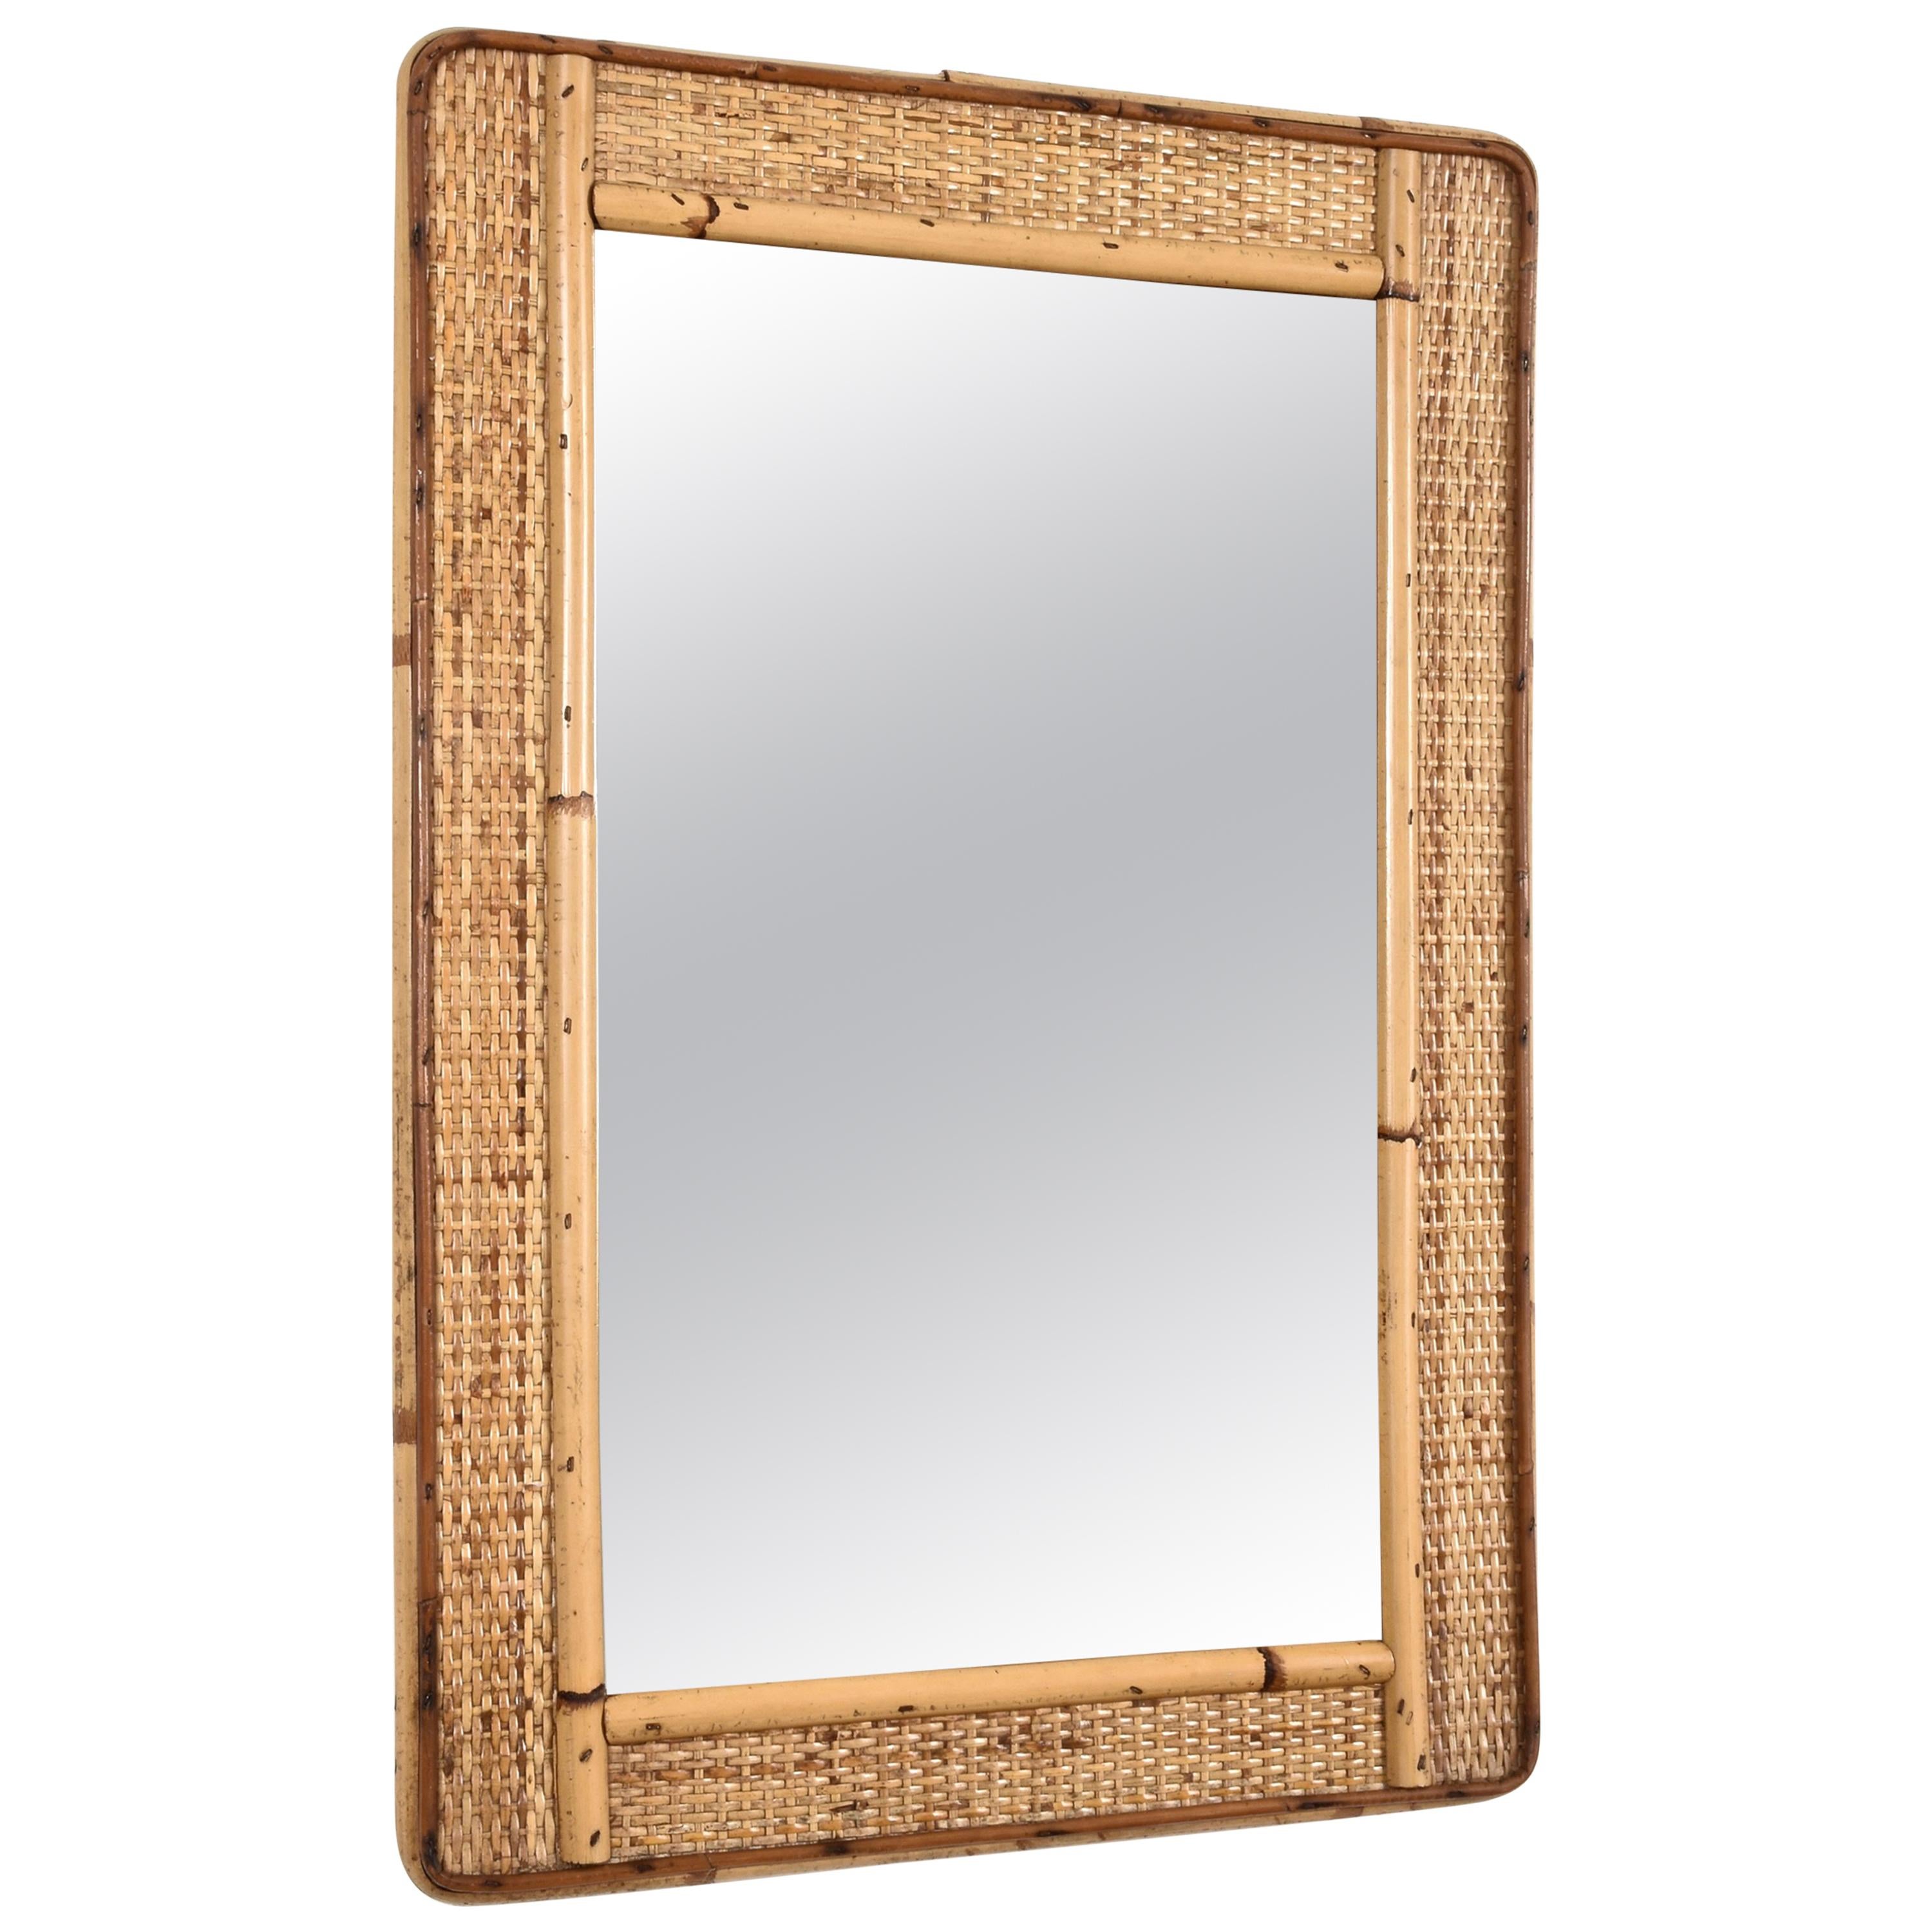 Rectangular Mirror with Bamboo Wicker Woven Frame from the 1970s, Italy For Sale